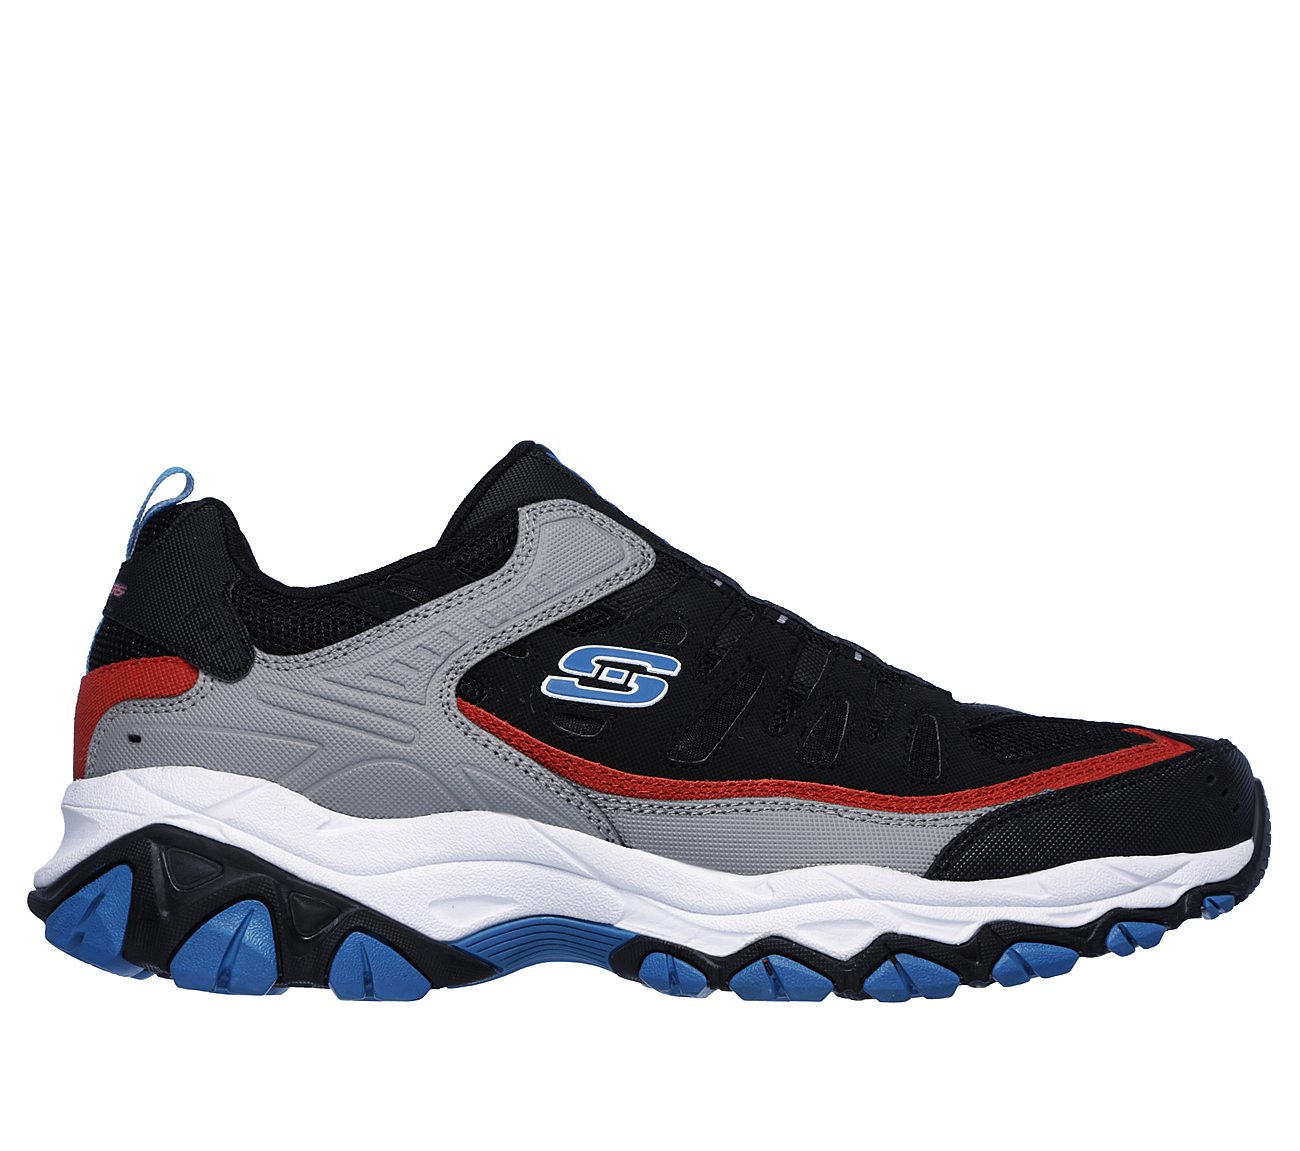 Skechers Afterburn M Fit Athletic Shoes - FitnessRetro